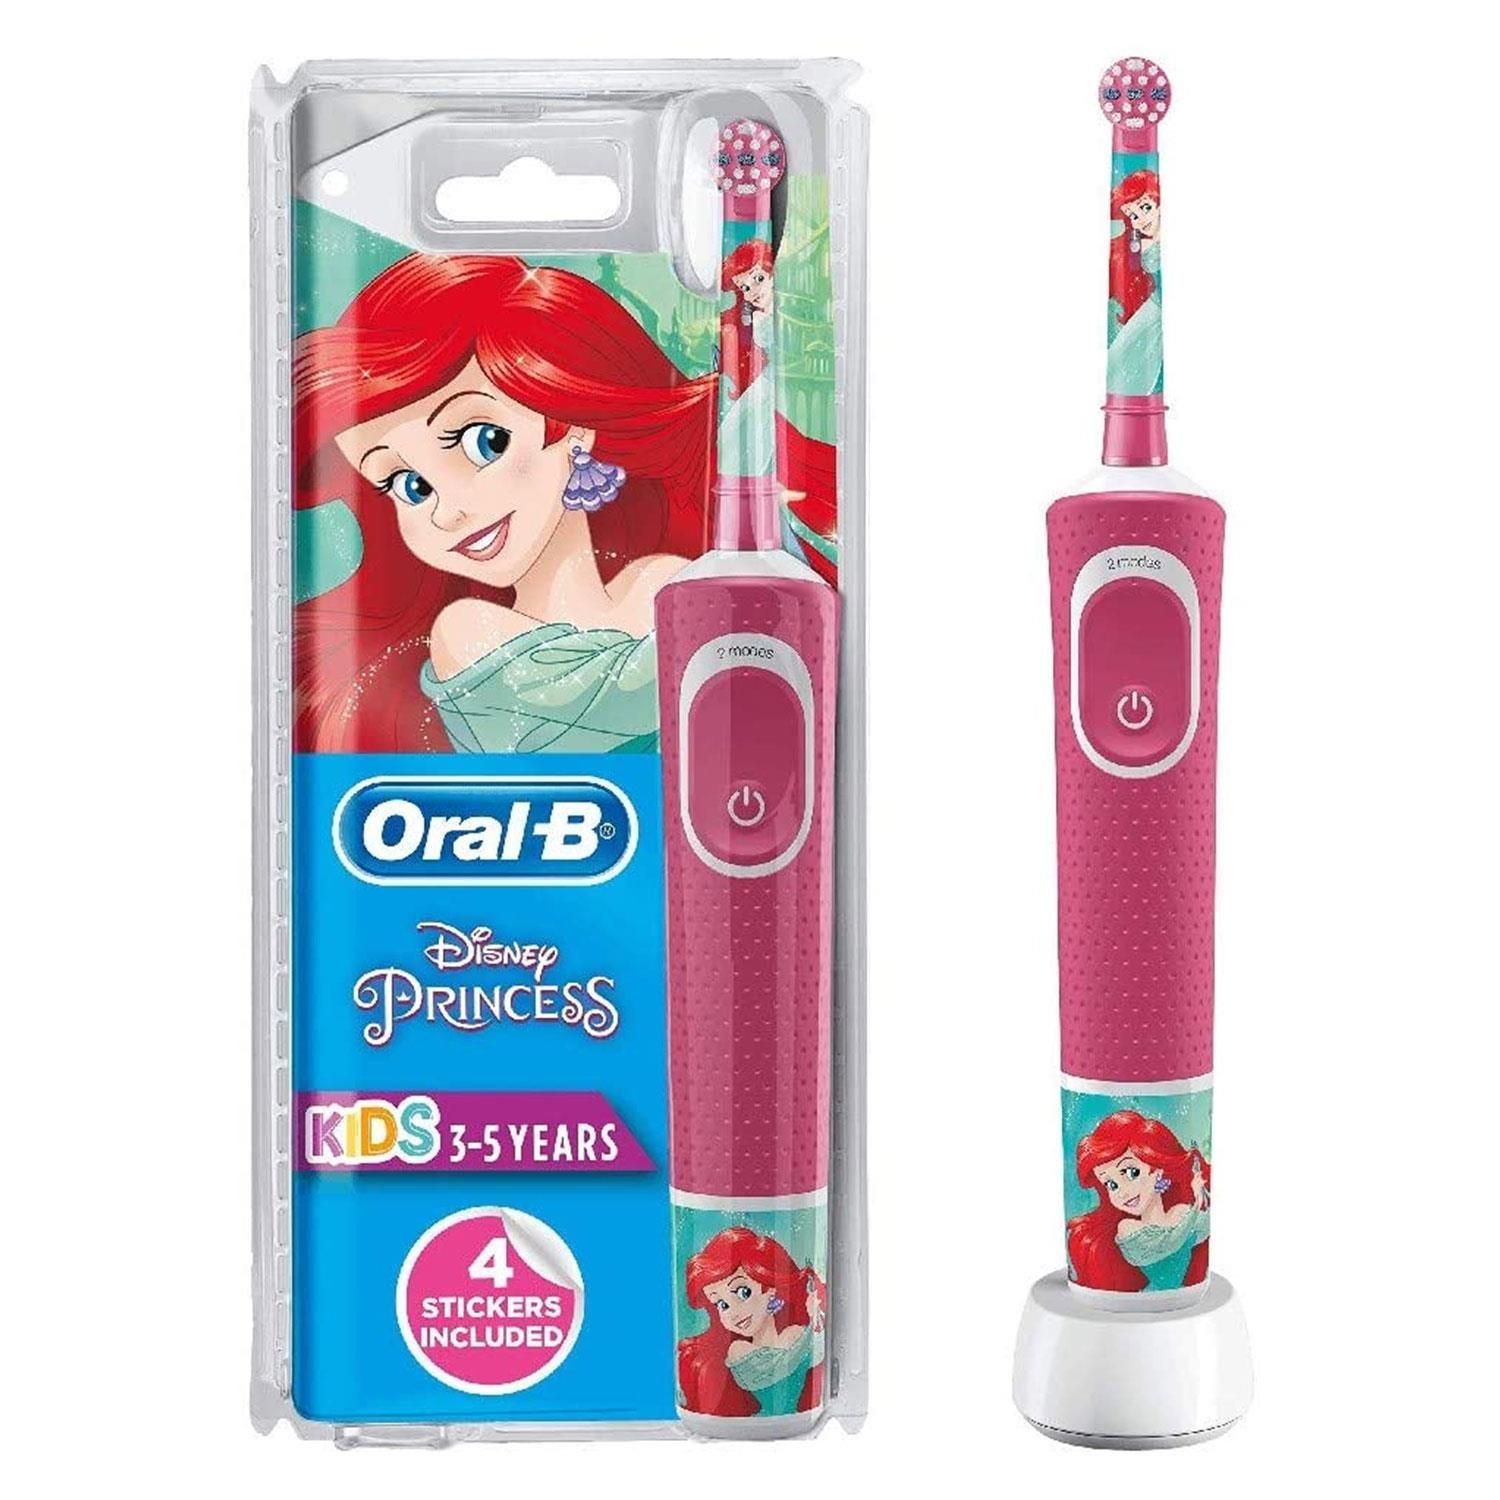 Oral-B Power Kids Electric Rechargeable Toothbrush Featuring Disney Princesses.  The Oral-B Stages Power Kids Electric Toothbrush, featuring fun and friendly Disney princesses, puts the power of clean in little hands. This rechargeable electric toothbrush features extra-soft bristles for young mouths and is compatible with the Disney MagicTimer app by Oral-B. Download the app to help your kids brush for a dentist-recommended 2 minutes and learn proper oral care habits that will last them a lifetime.

Features:

  Rotating powerhead reaches, surrounds and thoroughly cleans multiple surfaces
  Extra-soft bristles clean teeth as gently as a soft manual brush
  Removes more plaque than a regular manual toothbrush
  Makes brushing teeth fun with Disney Princess characters
  Compatible with the Disney MagicTimer App by Oral-B to help kids brush longer
  9 out of 10 kids will brush longer with the MagicTimer App
  Rechargeable battery lasts up to 5 days

The Box Contains:  Oral-B Stages Power Kids Electric Toothbrush Featuring Disney Princess, 1 Kids toothbrush head, 1 Toothbrush charger with a UK 2 pin plug